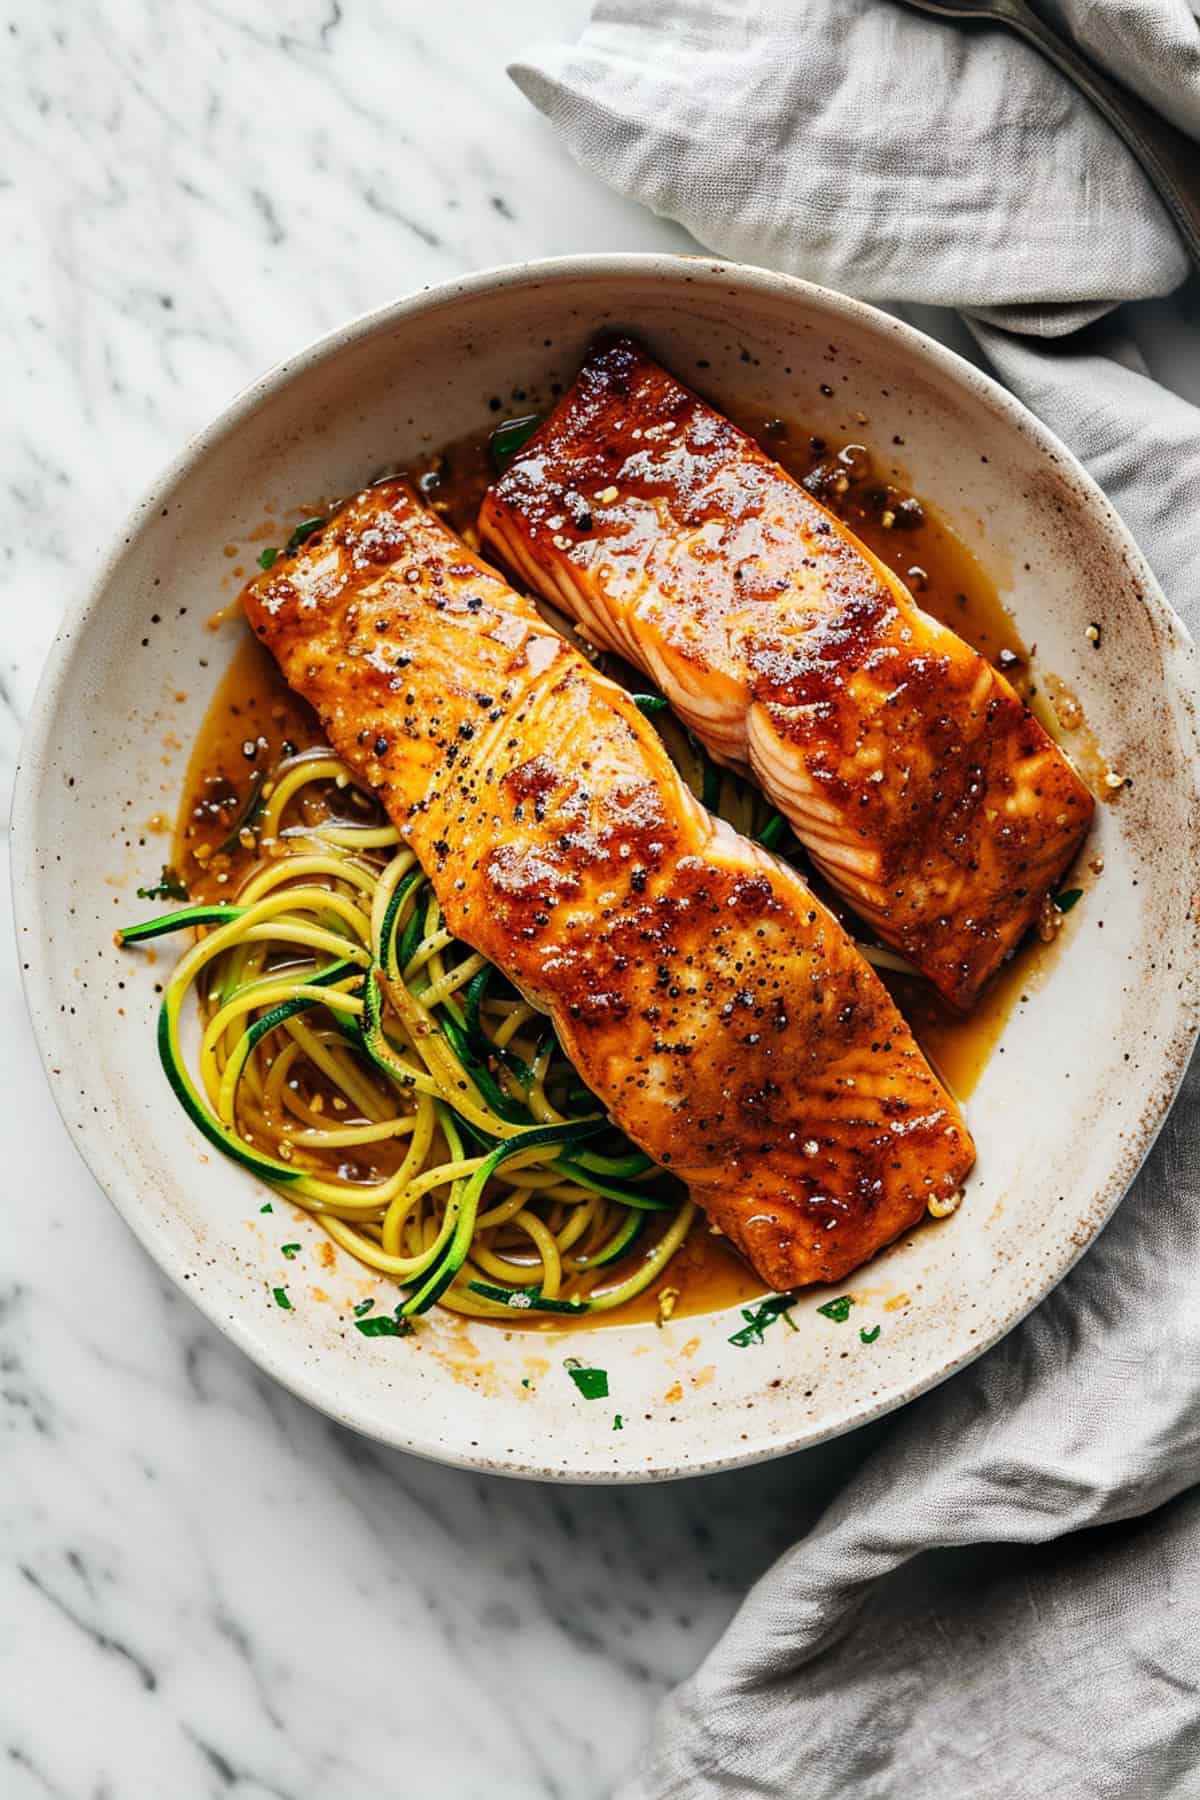 Maple glazed salmon in a pan with zucchini noodles.